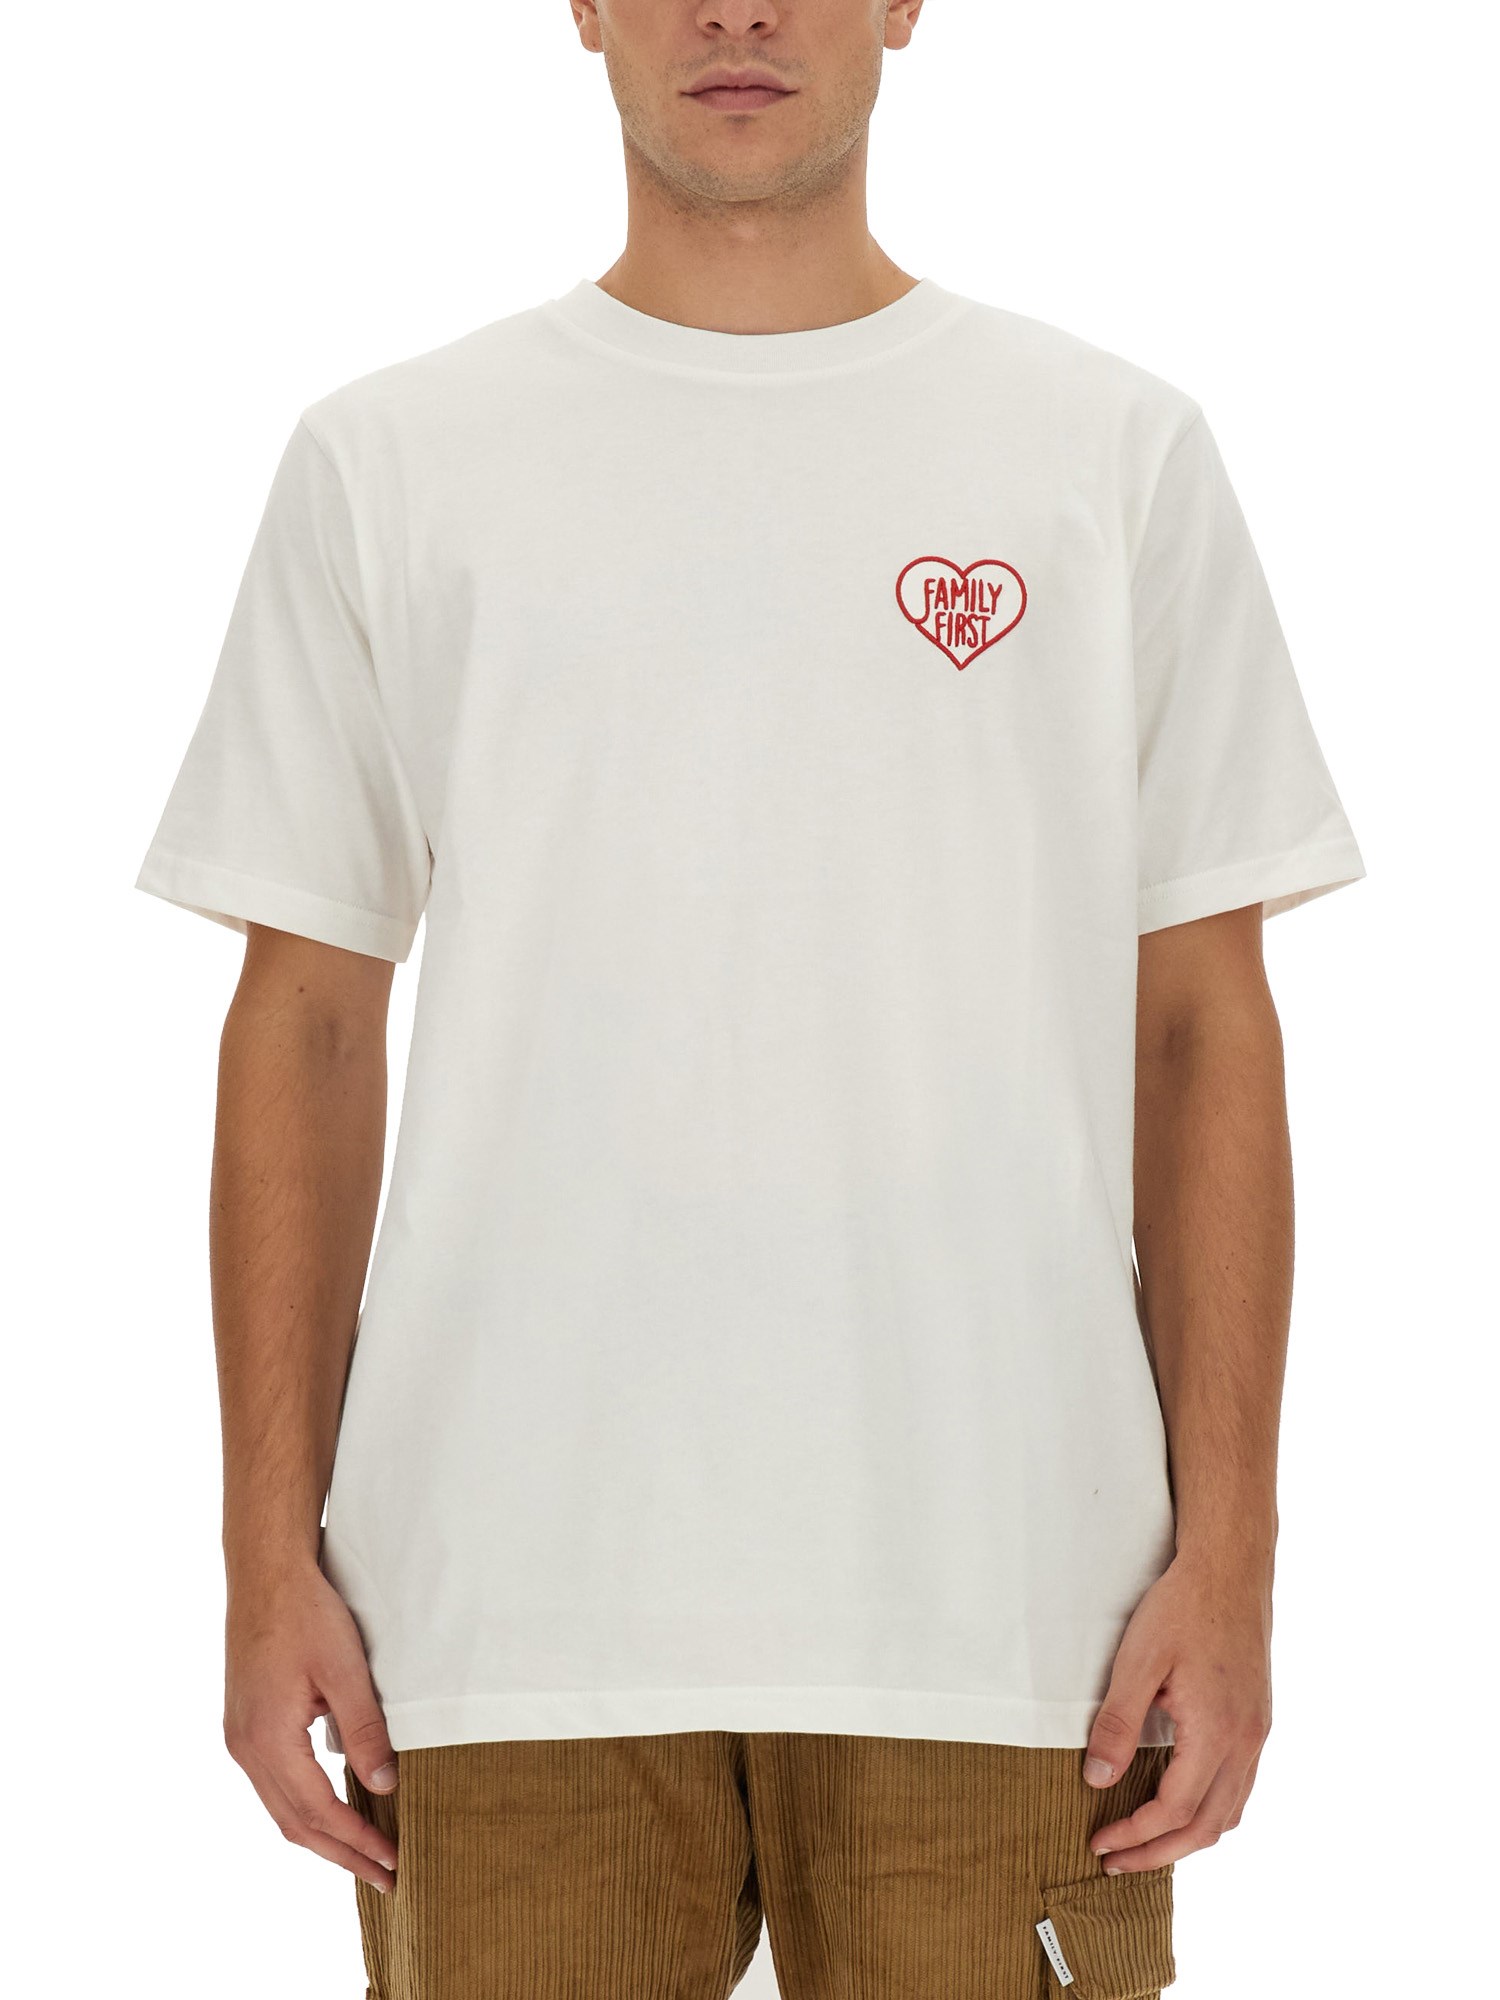 family first t-shirt with logo